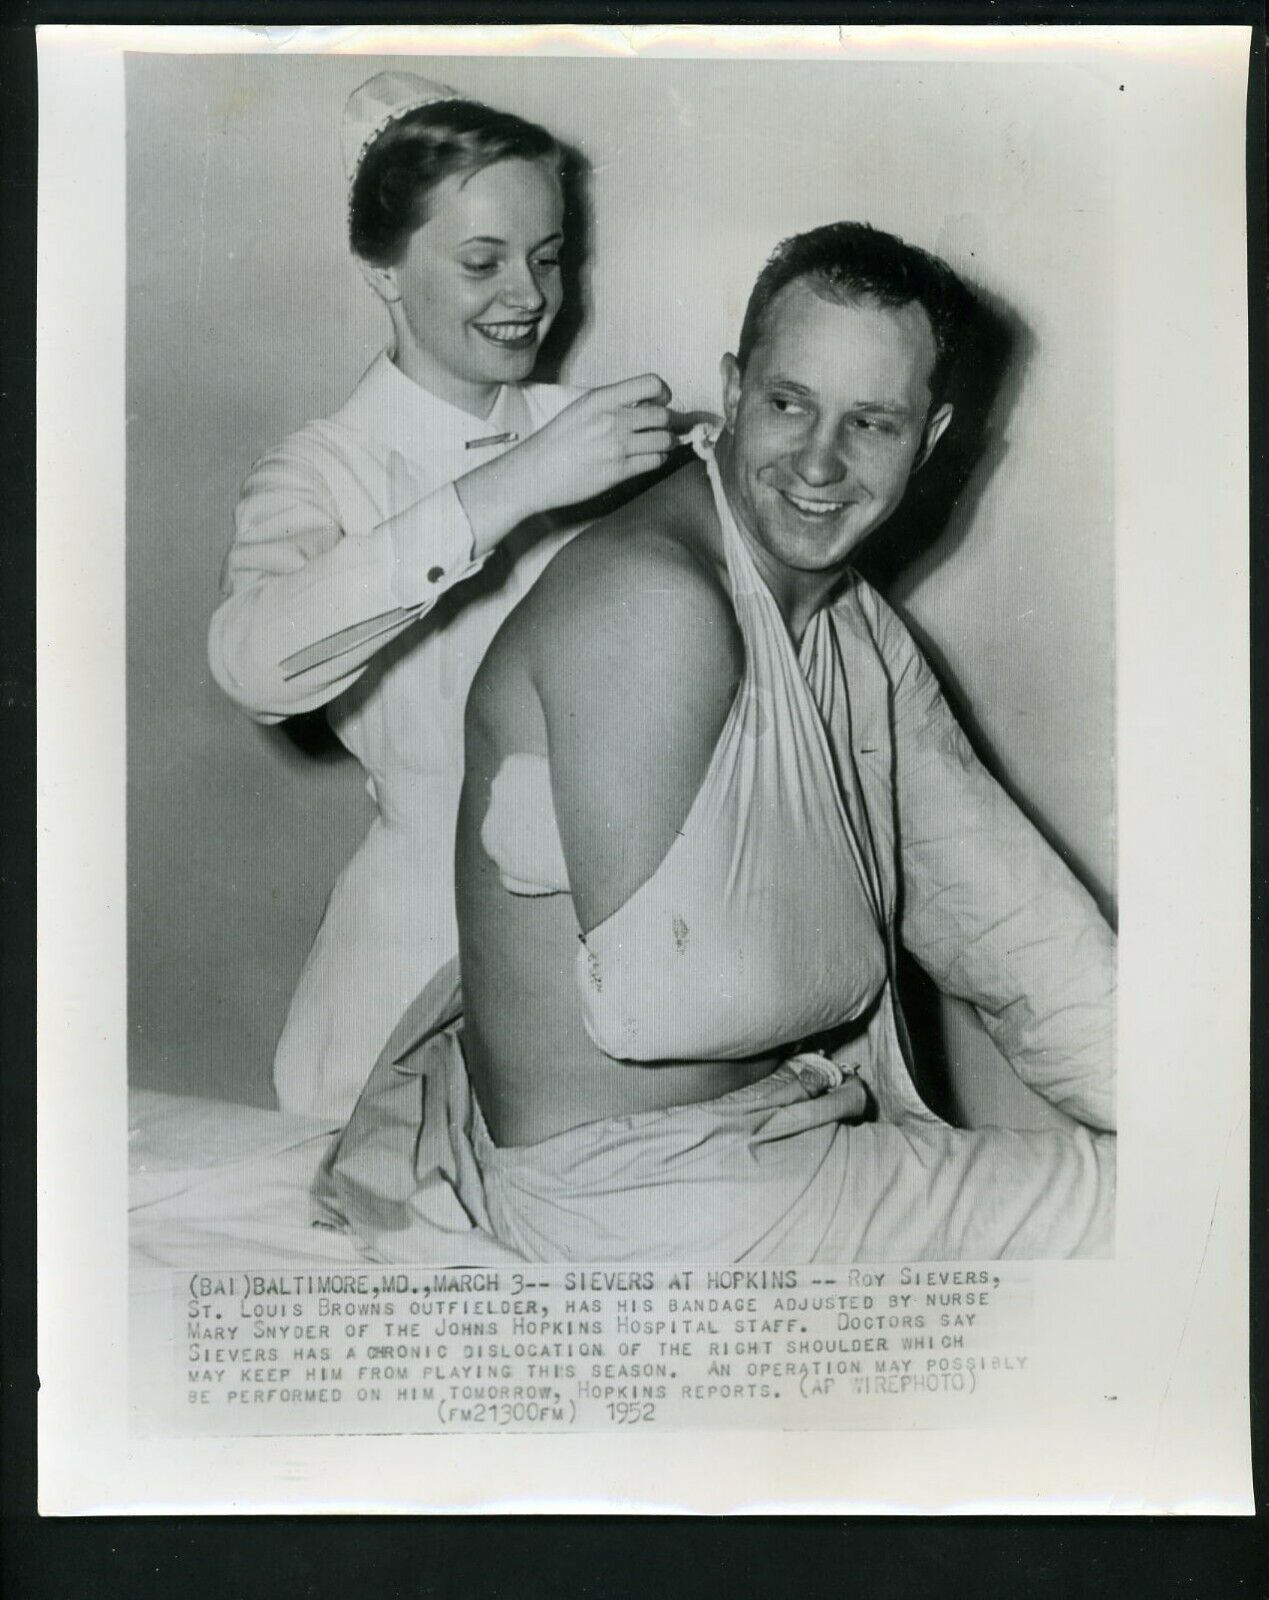 Roy Sievers shoulder injury 1952 Press Photo Poster painting St. Louis Browns Nurse Mary Snyder